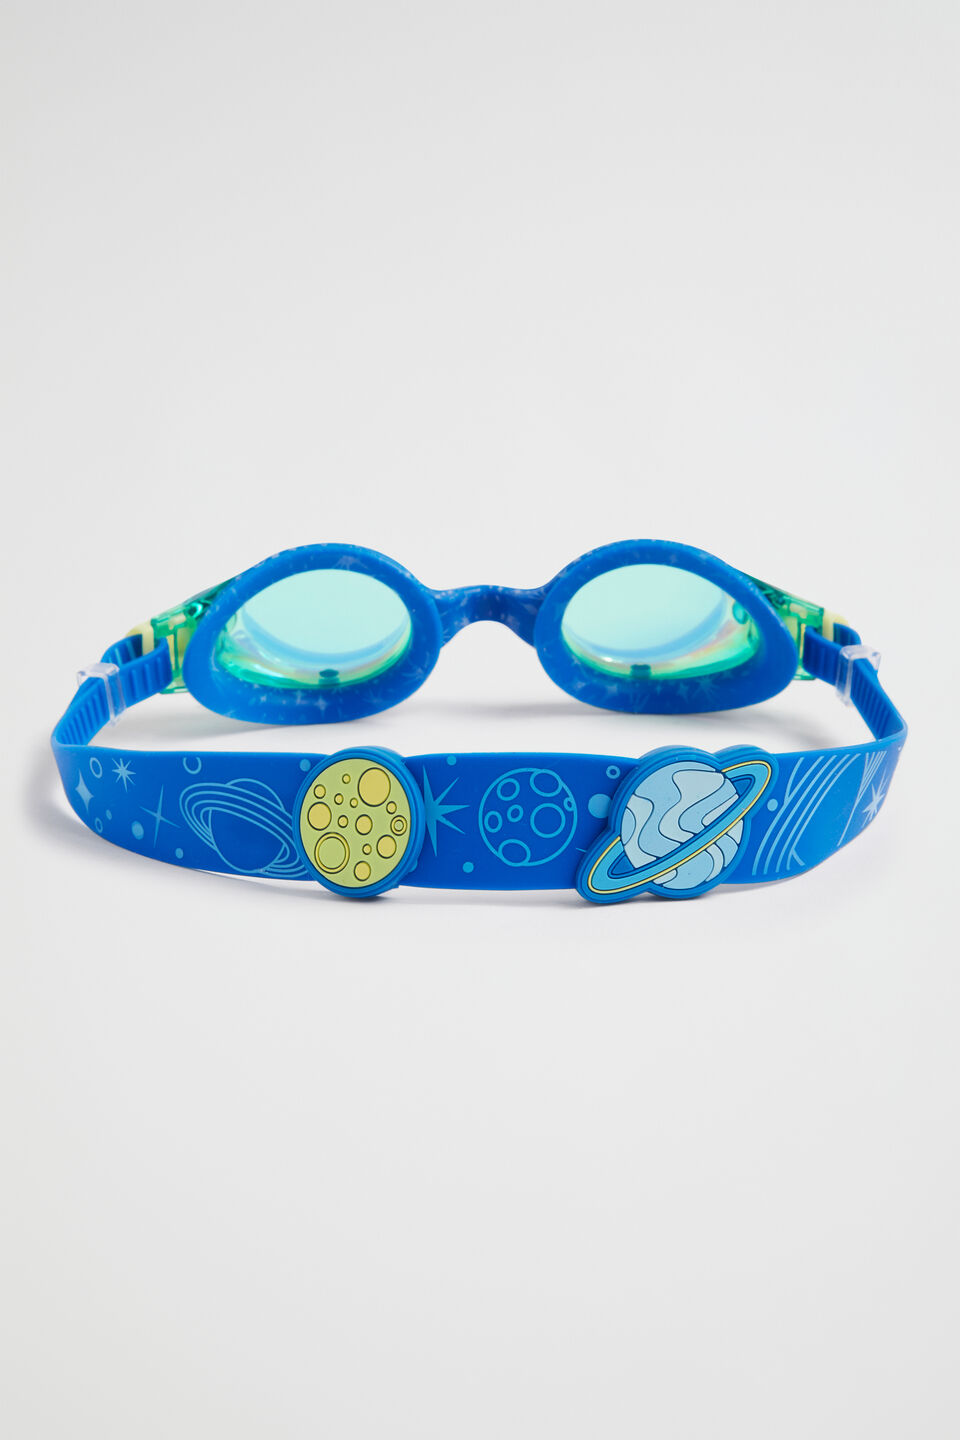 Blue Space Goggles  Blue